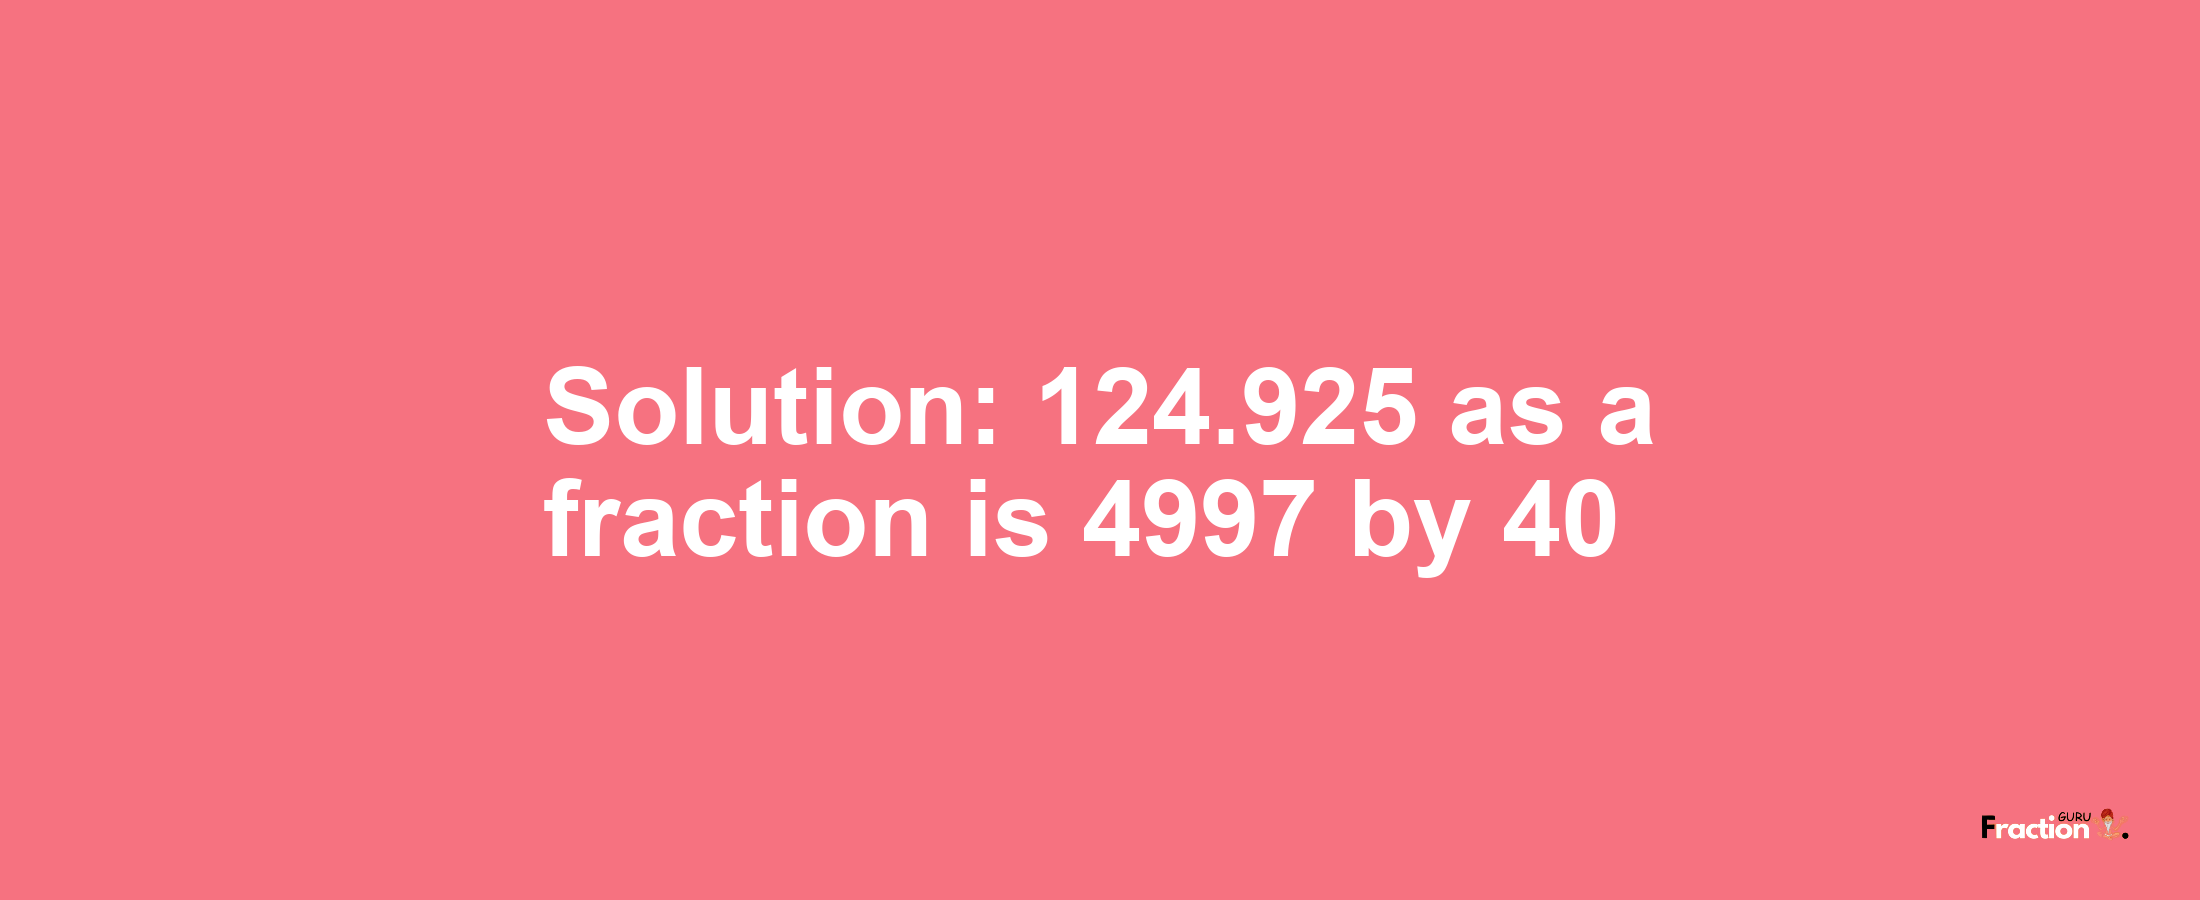 Solution:124.925 as a fraction is 4997/40